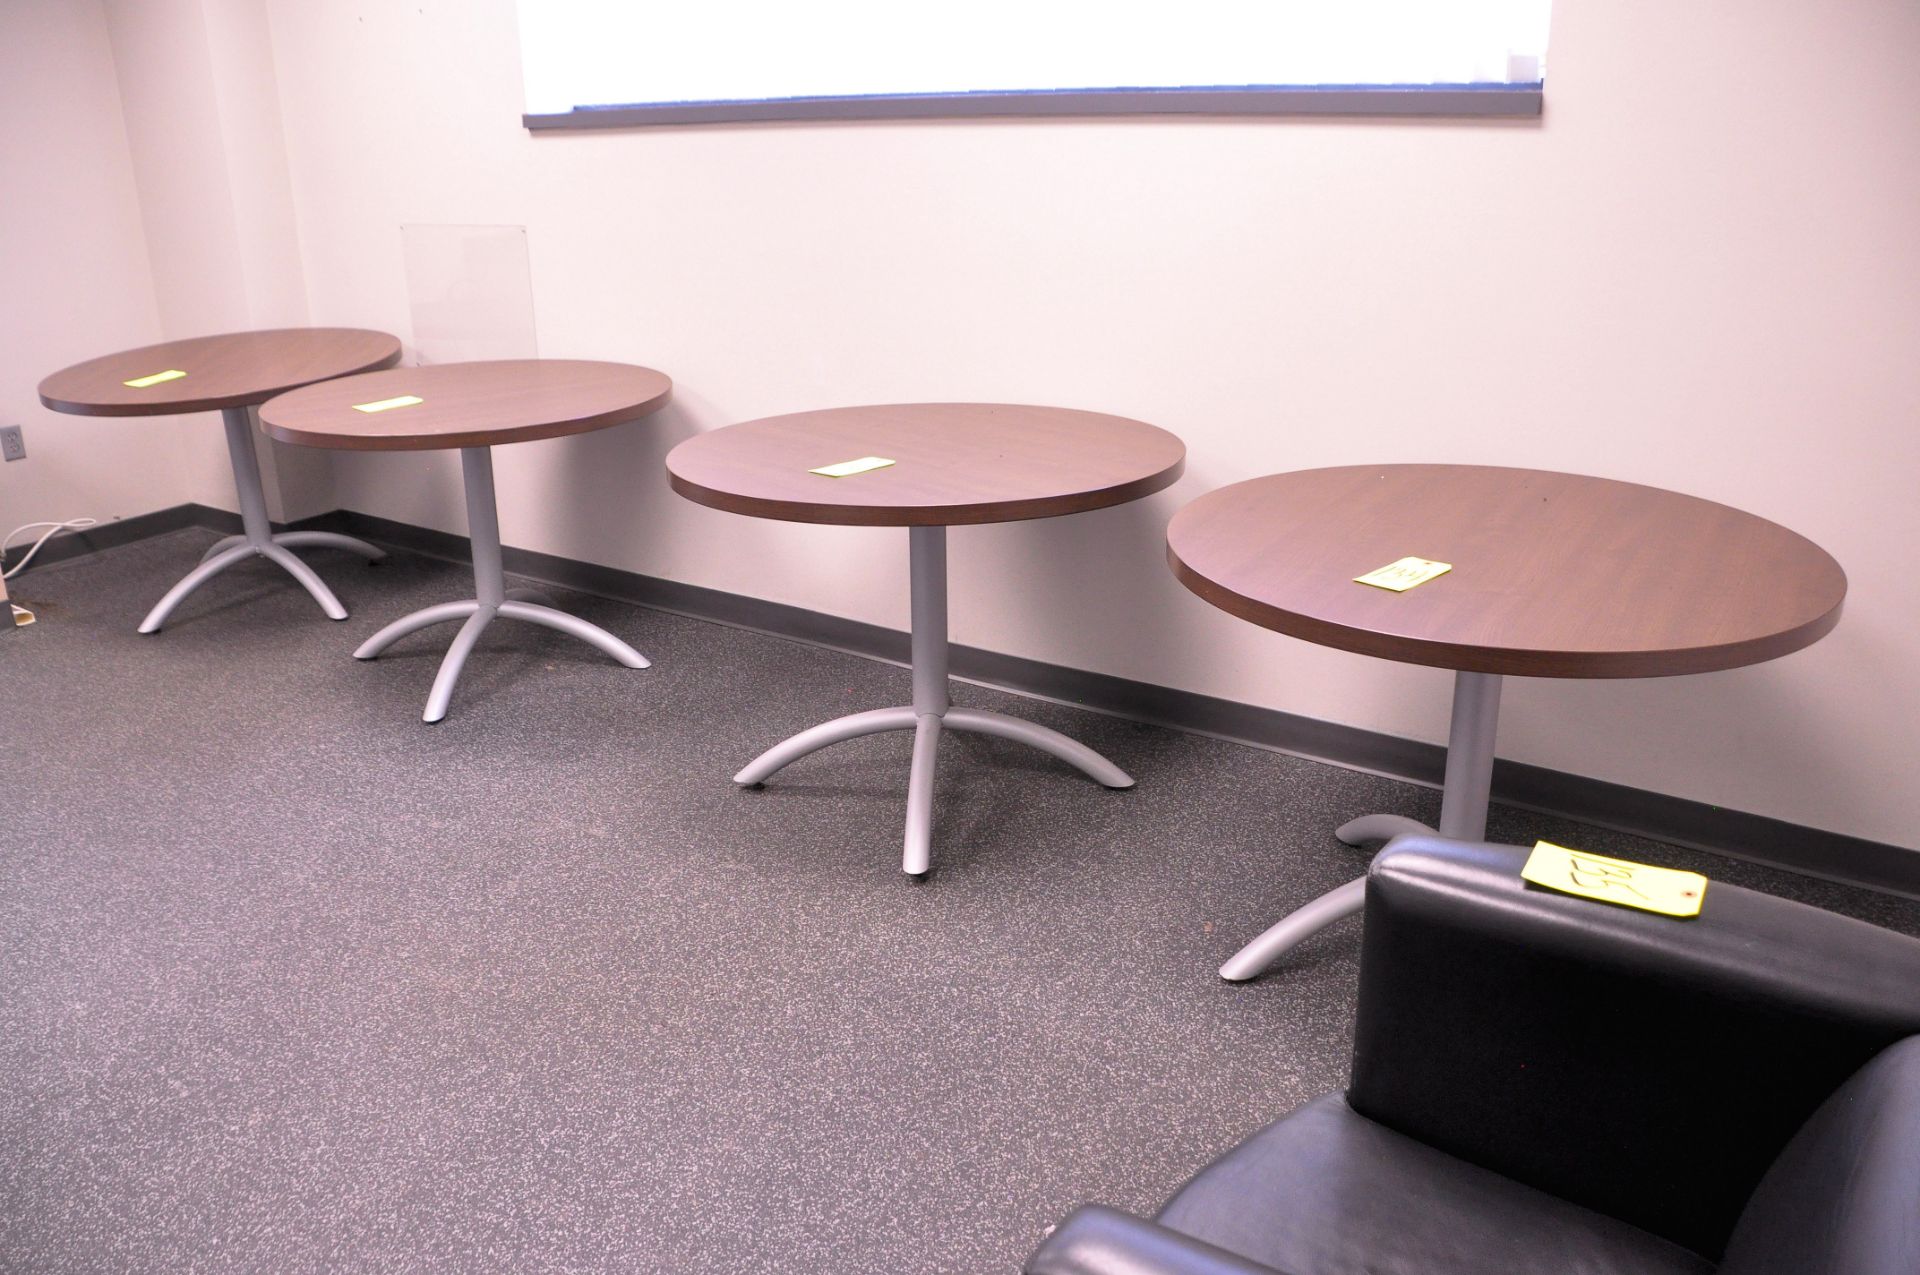 Lot-(4) 41" Round Tables in (1) Break Room, (Located 2nd Floor Offices)